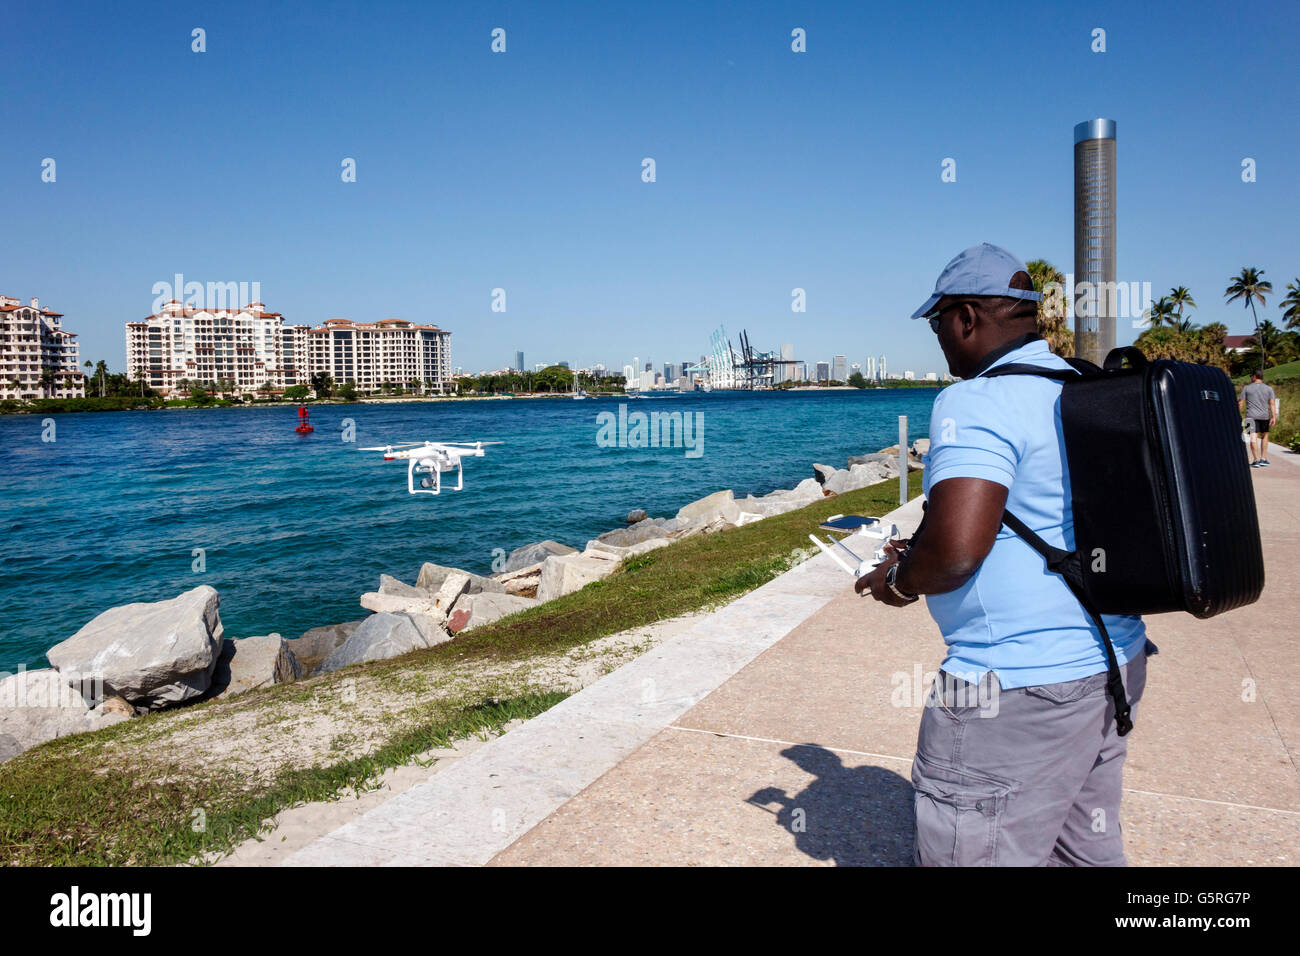 Miami Beach Florida,South Pointe Park,Government Cut,Biscayne Bay,Black adult,adults,man men male,working work worker workers,employee staff,NOAA,Sout Stock Photo